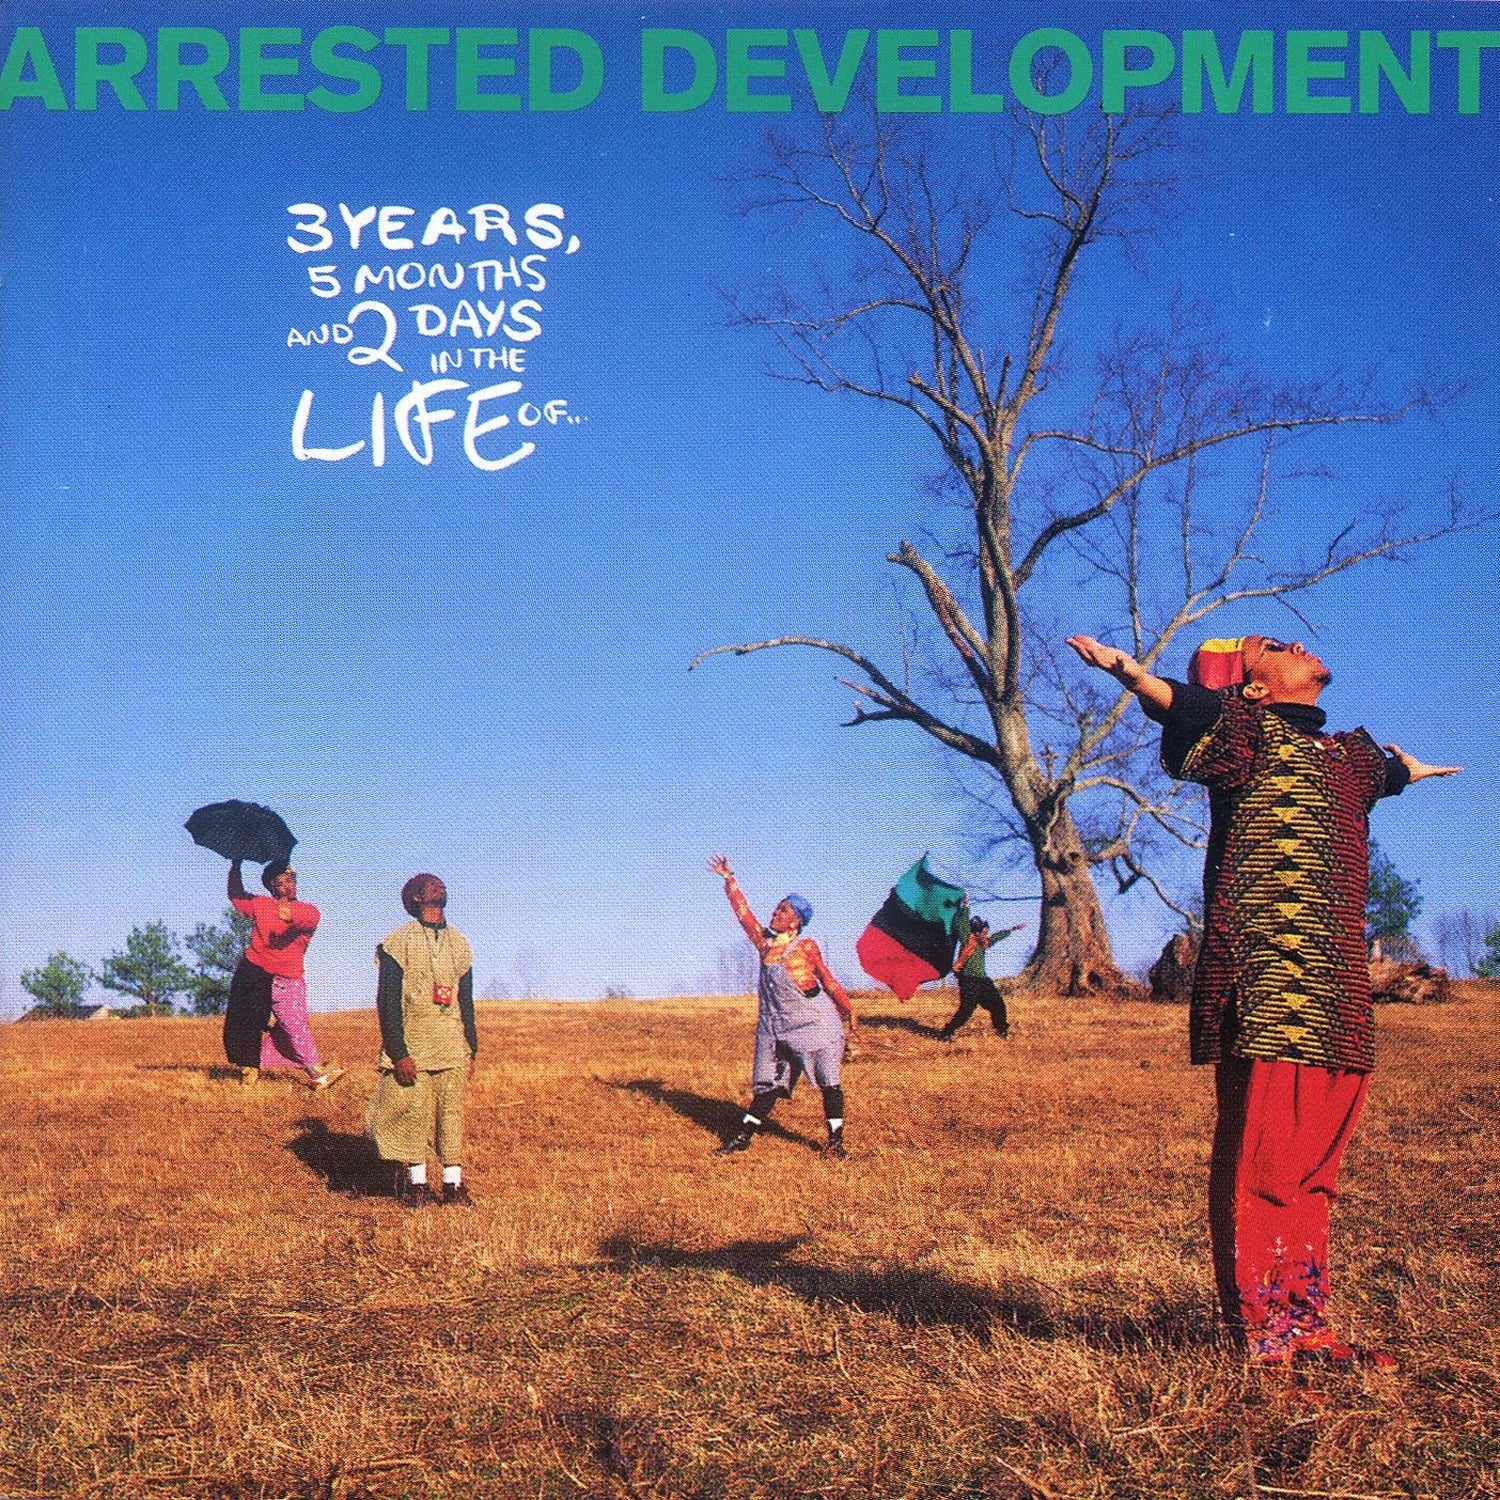 Arrested Development - 3 Years, 5 Months And 2 Days In The Life Of... - 33RPM